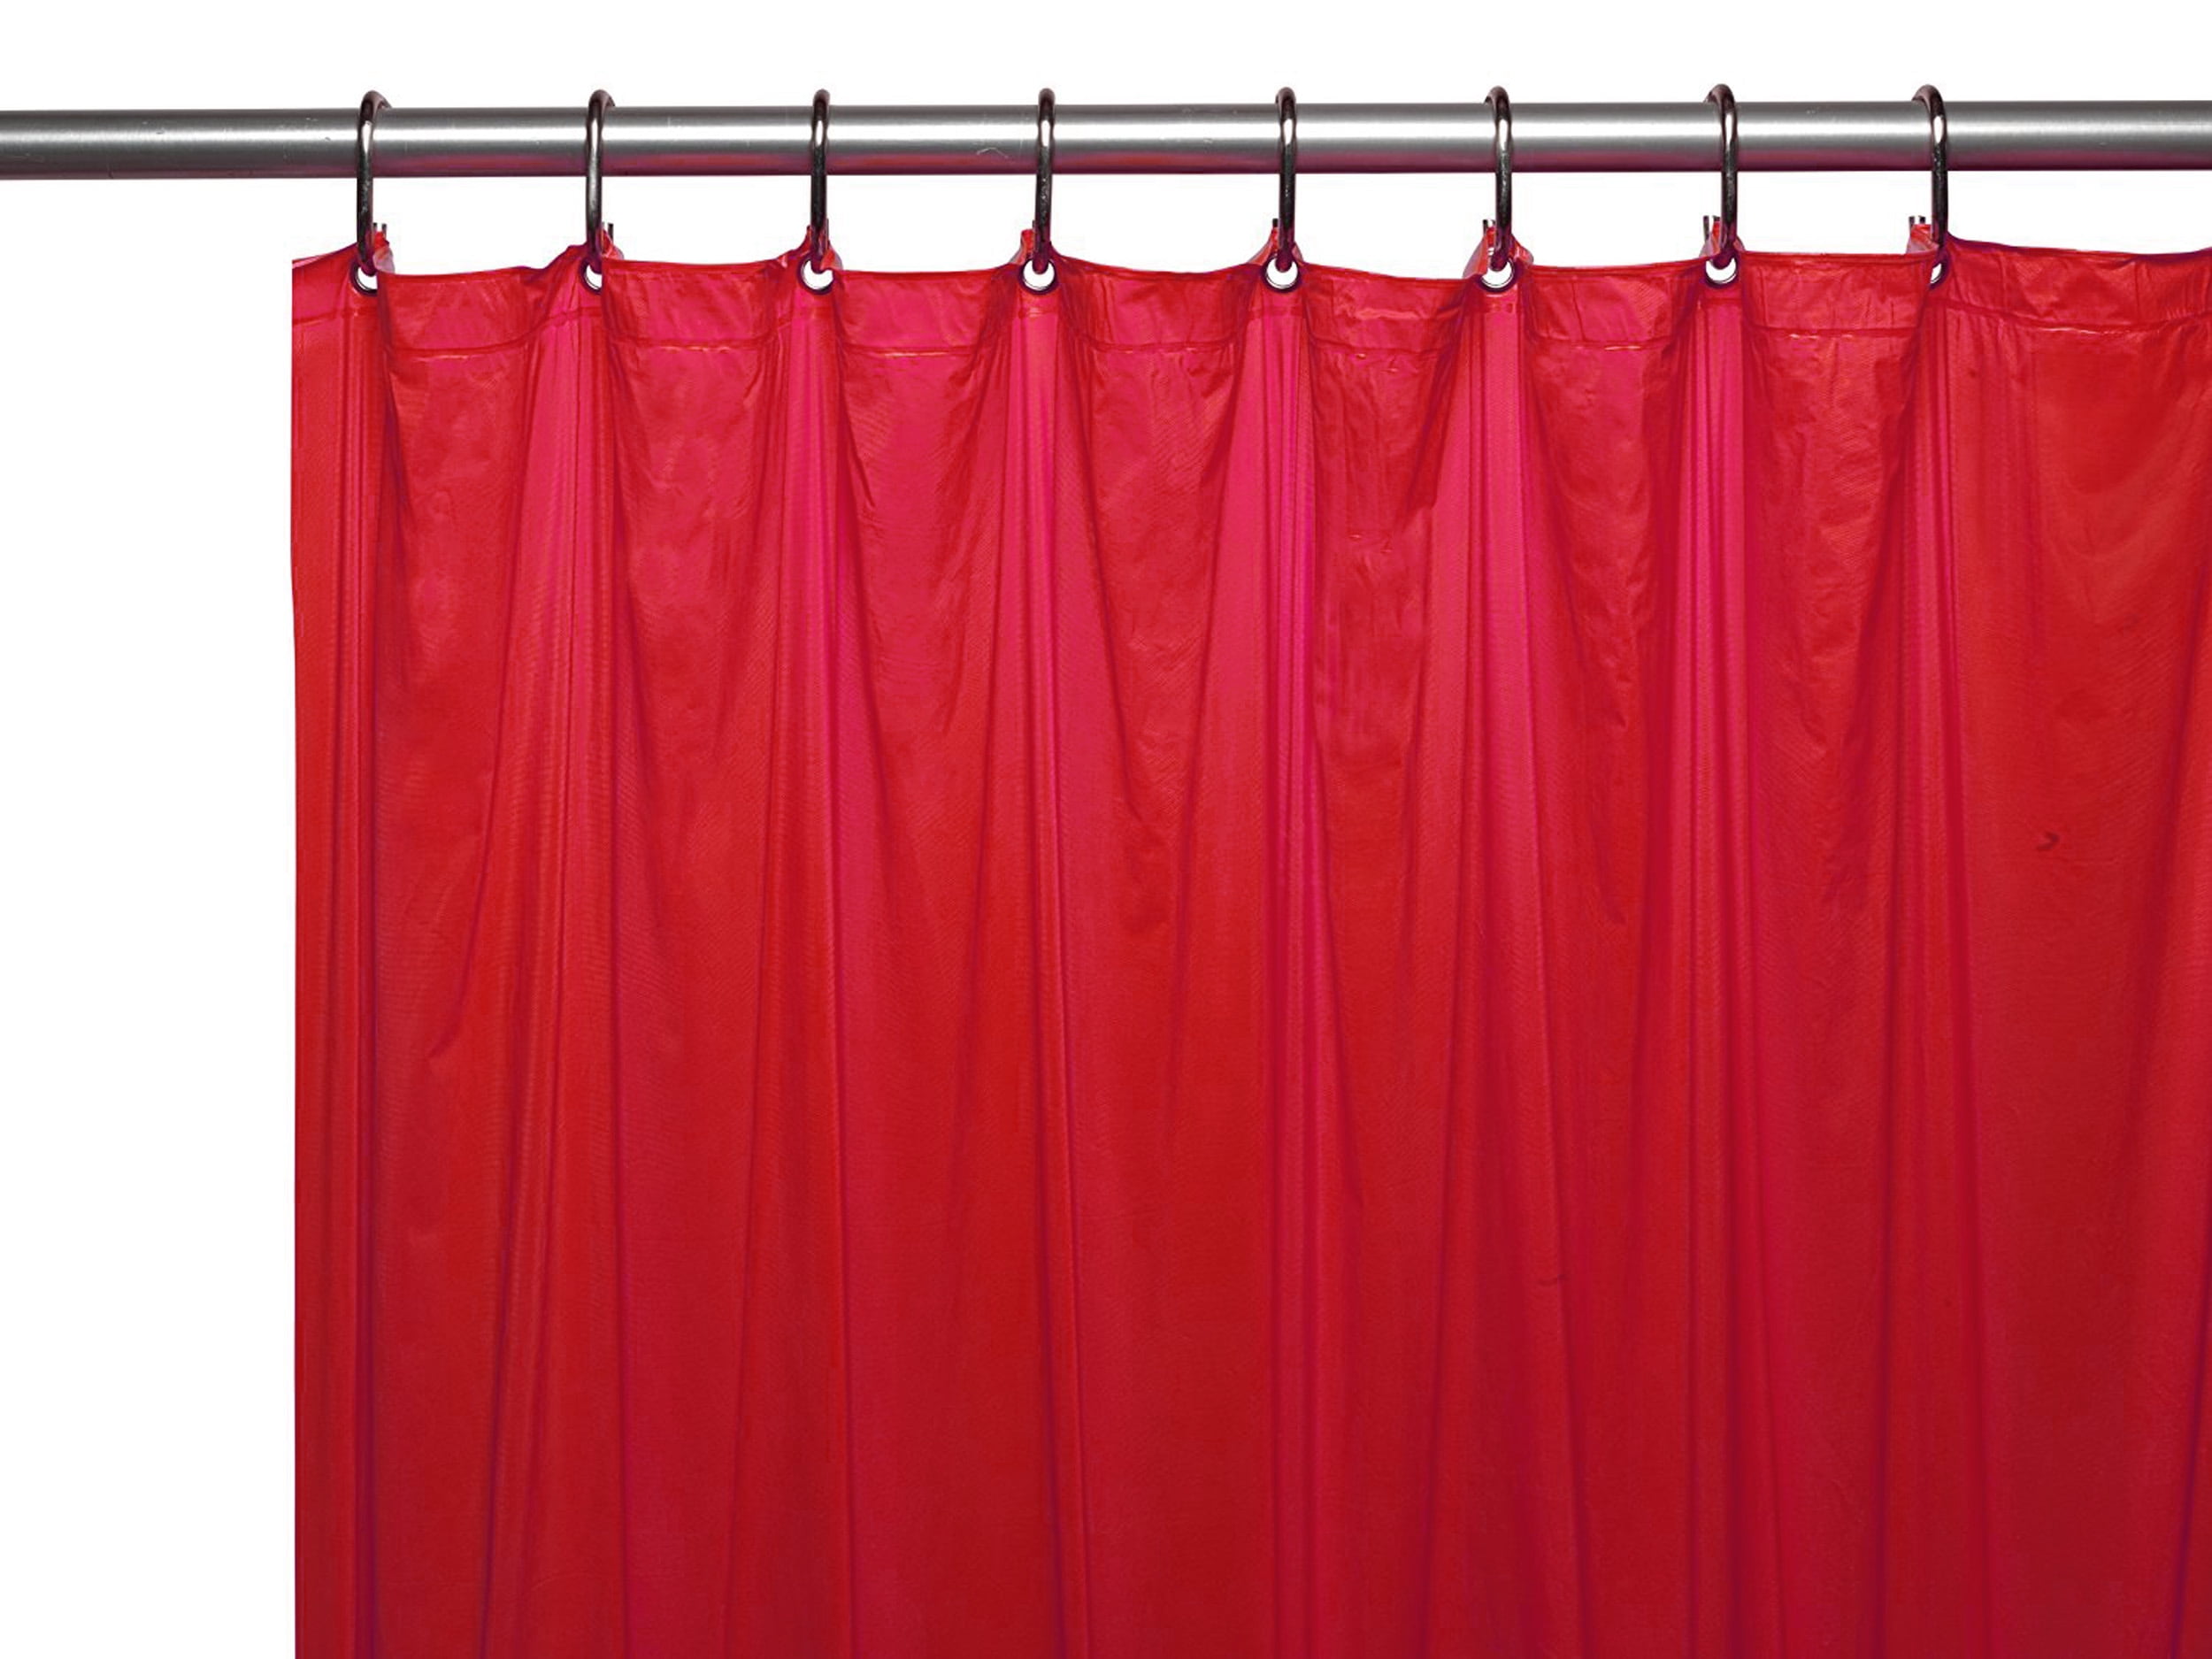 Shower Curtain Liner Metal Grommets, What Are The Standard Lengths Of Shower Curtains